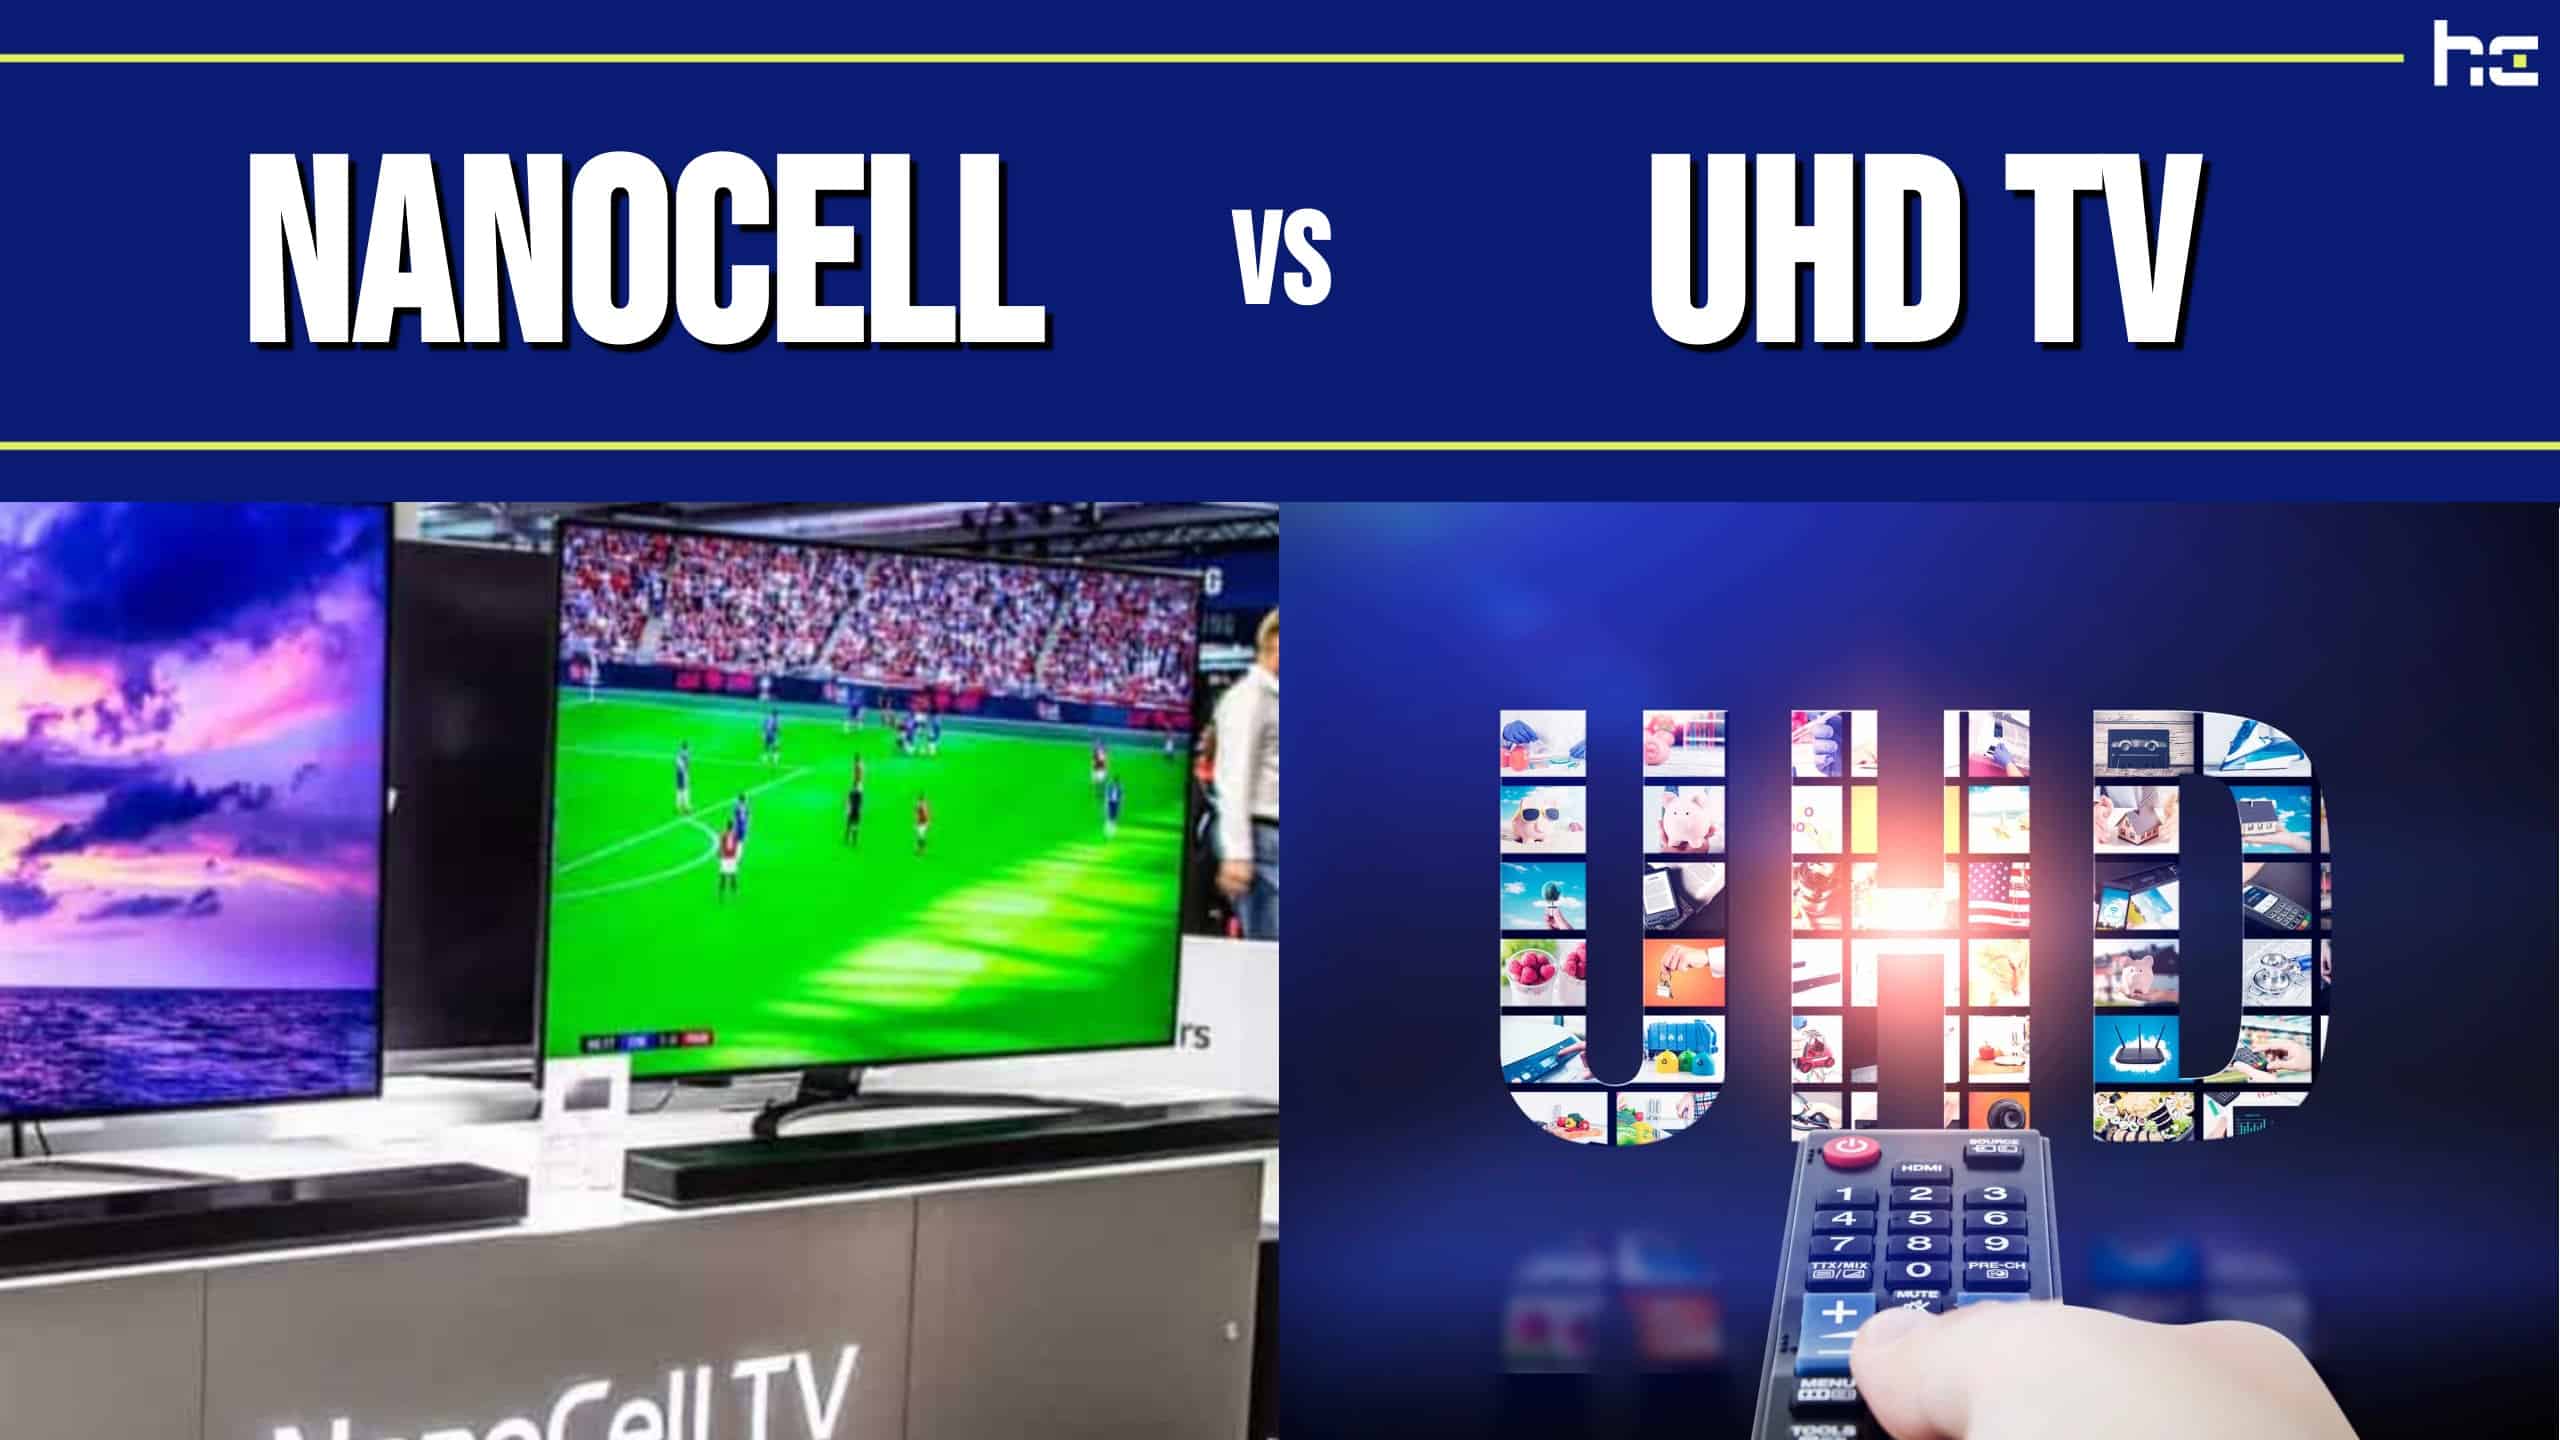 NanoCell vs UHD TV featured image